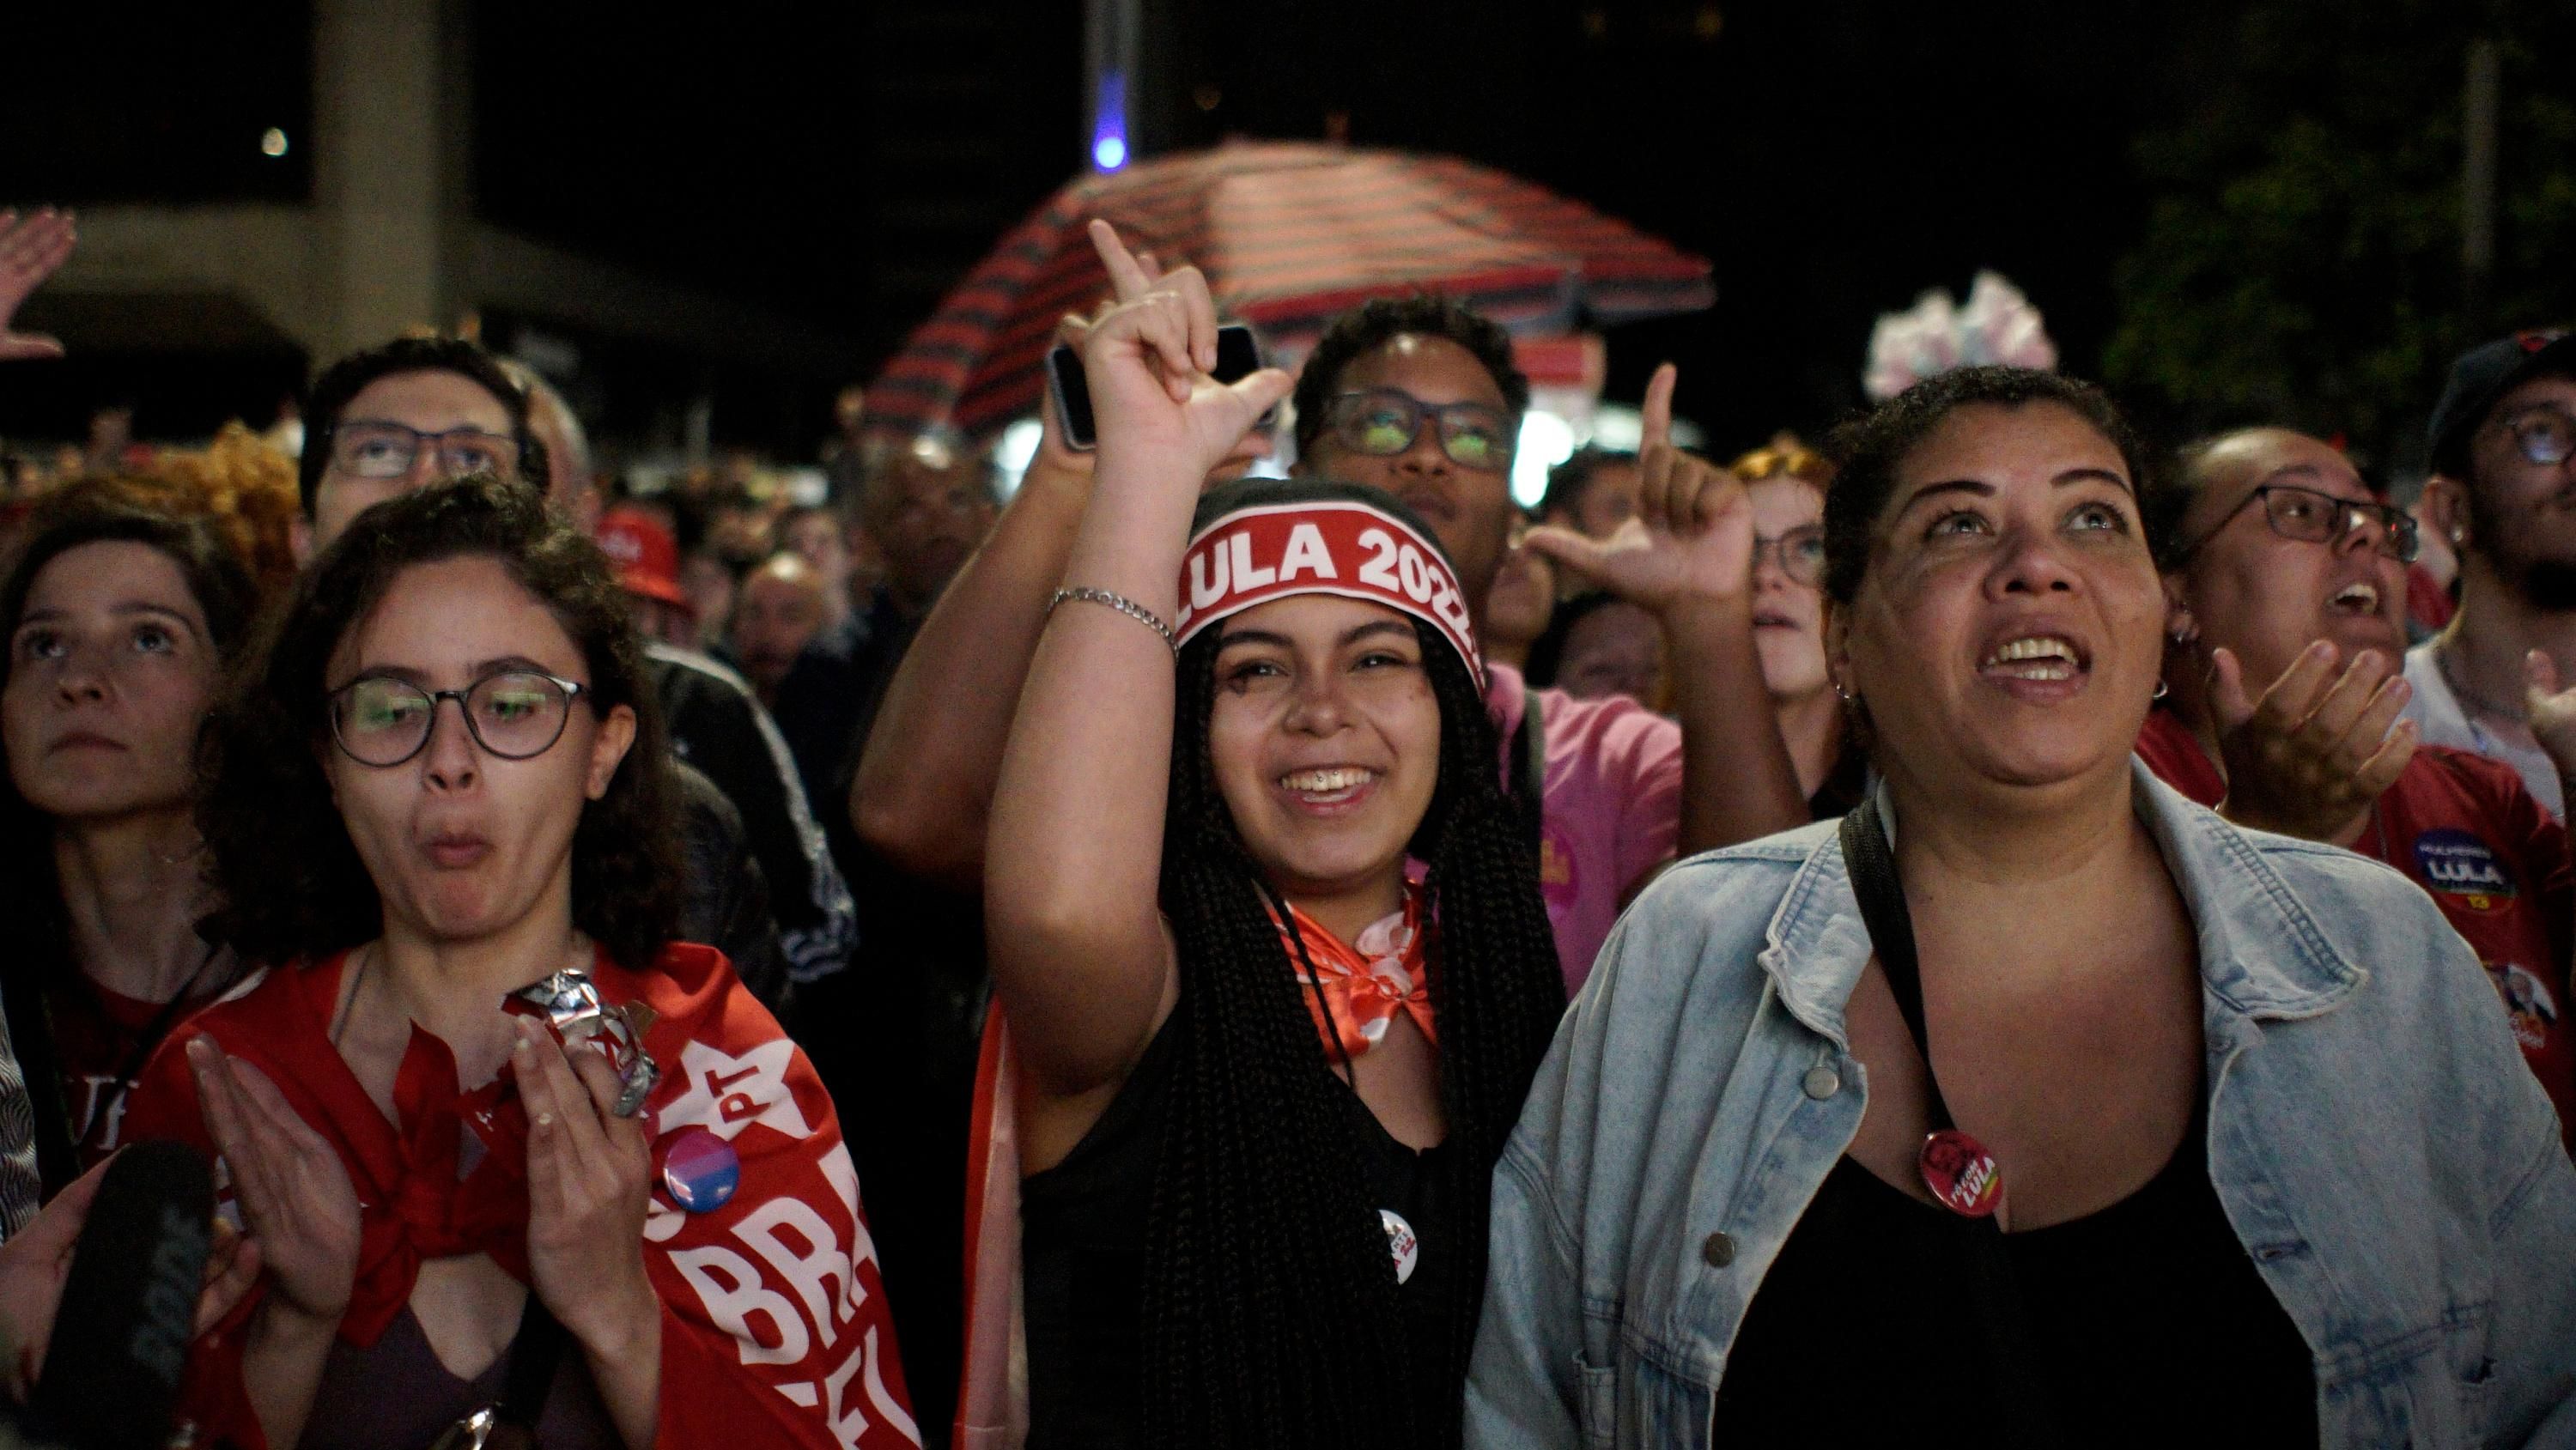 Lula supporters rally on Election Day in Brazil